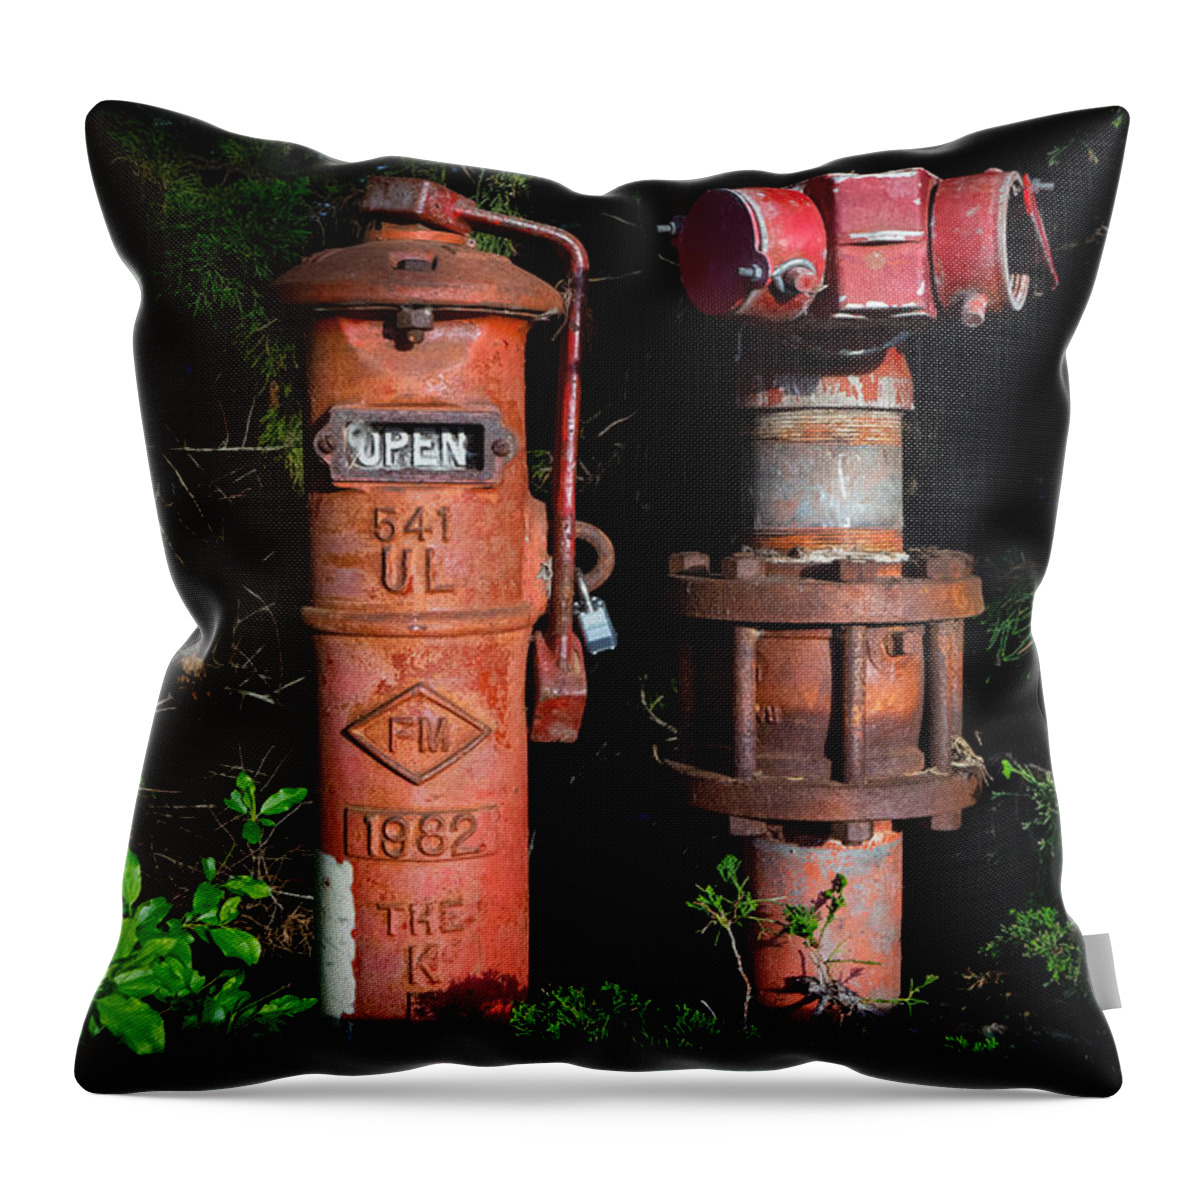 Standpipes Throw Pillow featuring the photograph Standpipes by Derek Dean